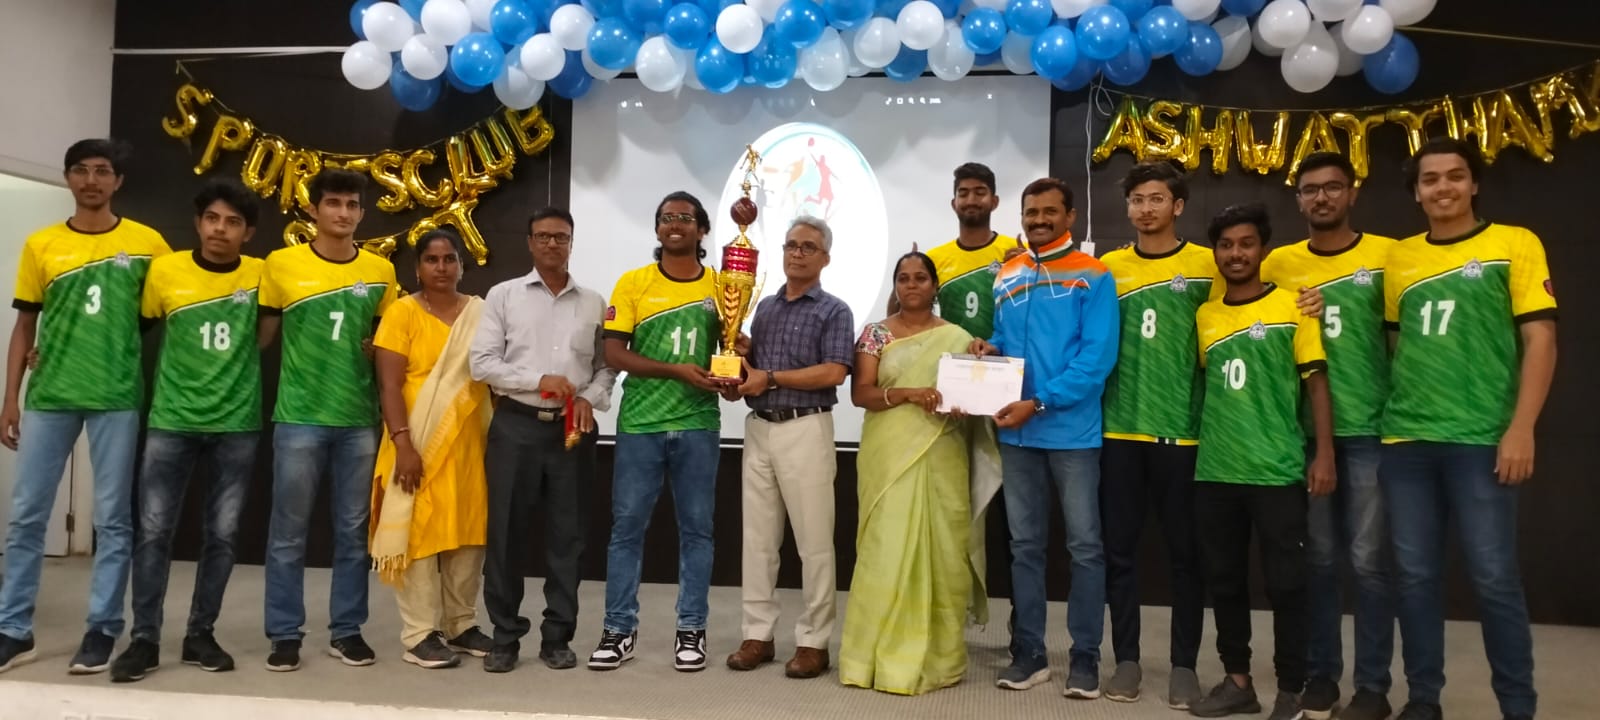 Sreenidhi Institute of Science & Technology has organised Football Tournament 
 from 14th to 16th Nov 2023.

First match MJCET won against IARE by 3-2
Second match won against MLRIT by 5-4
Semi- Final match won against Mahindra University by 1-0
Final match won against MRUH by 5-3.